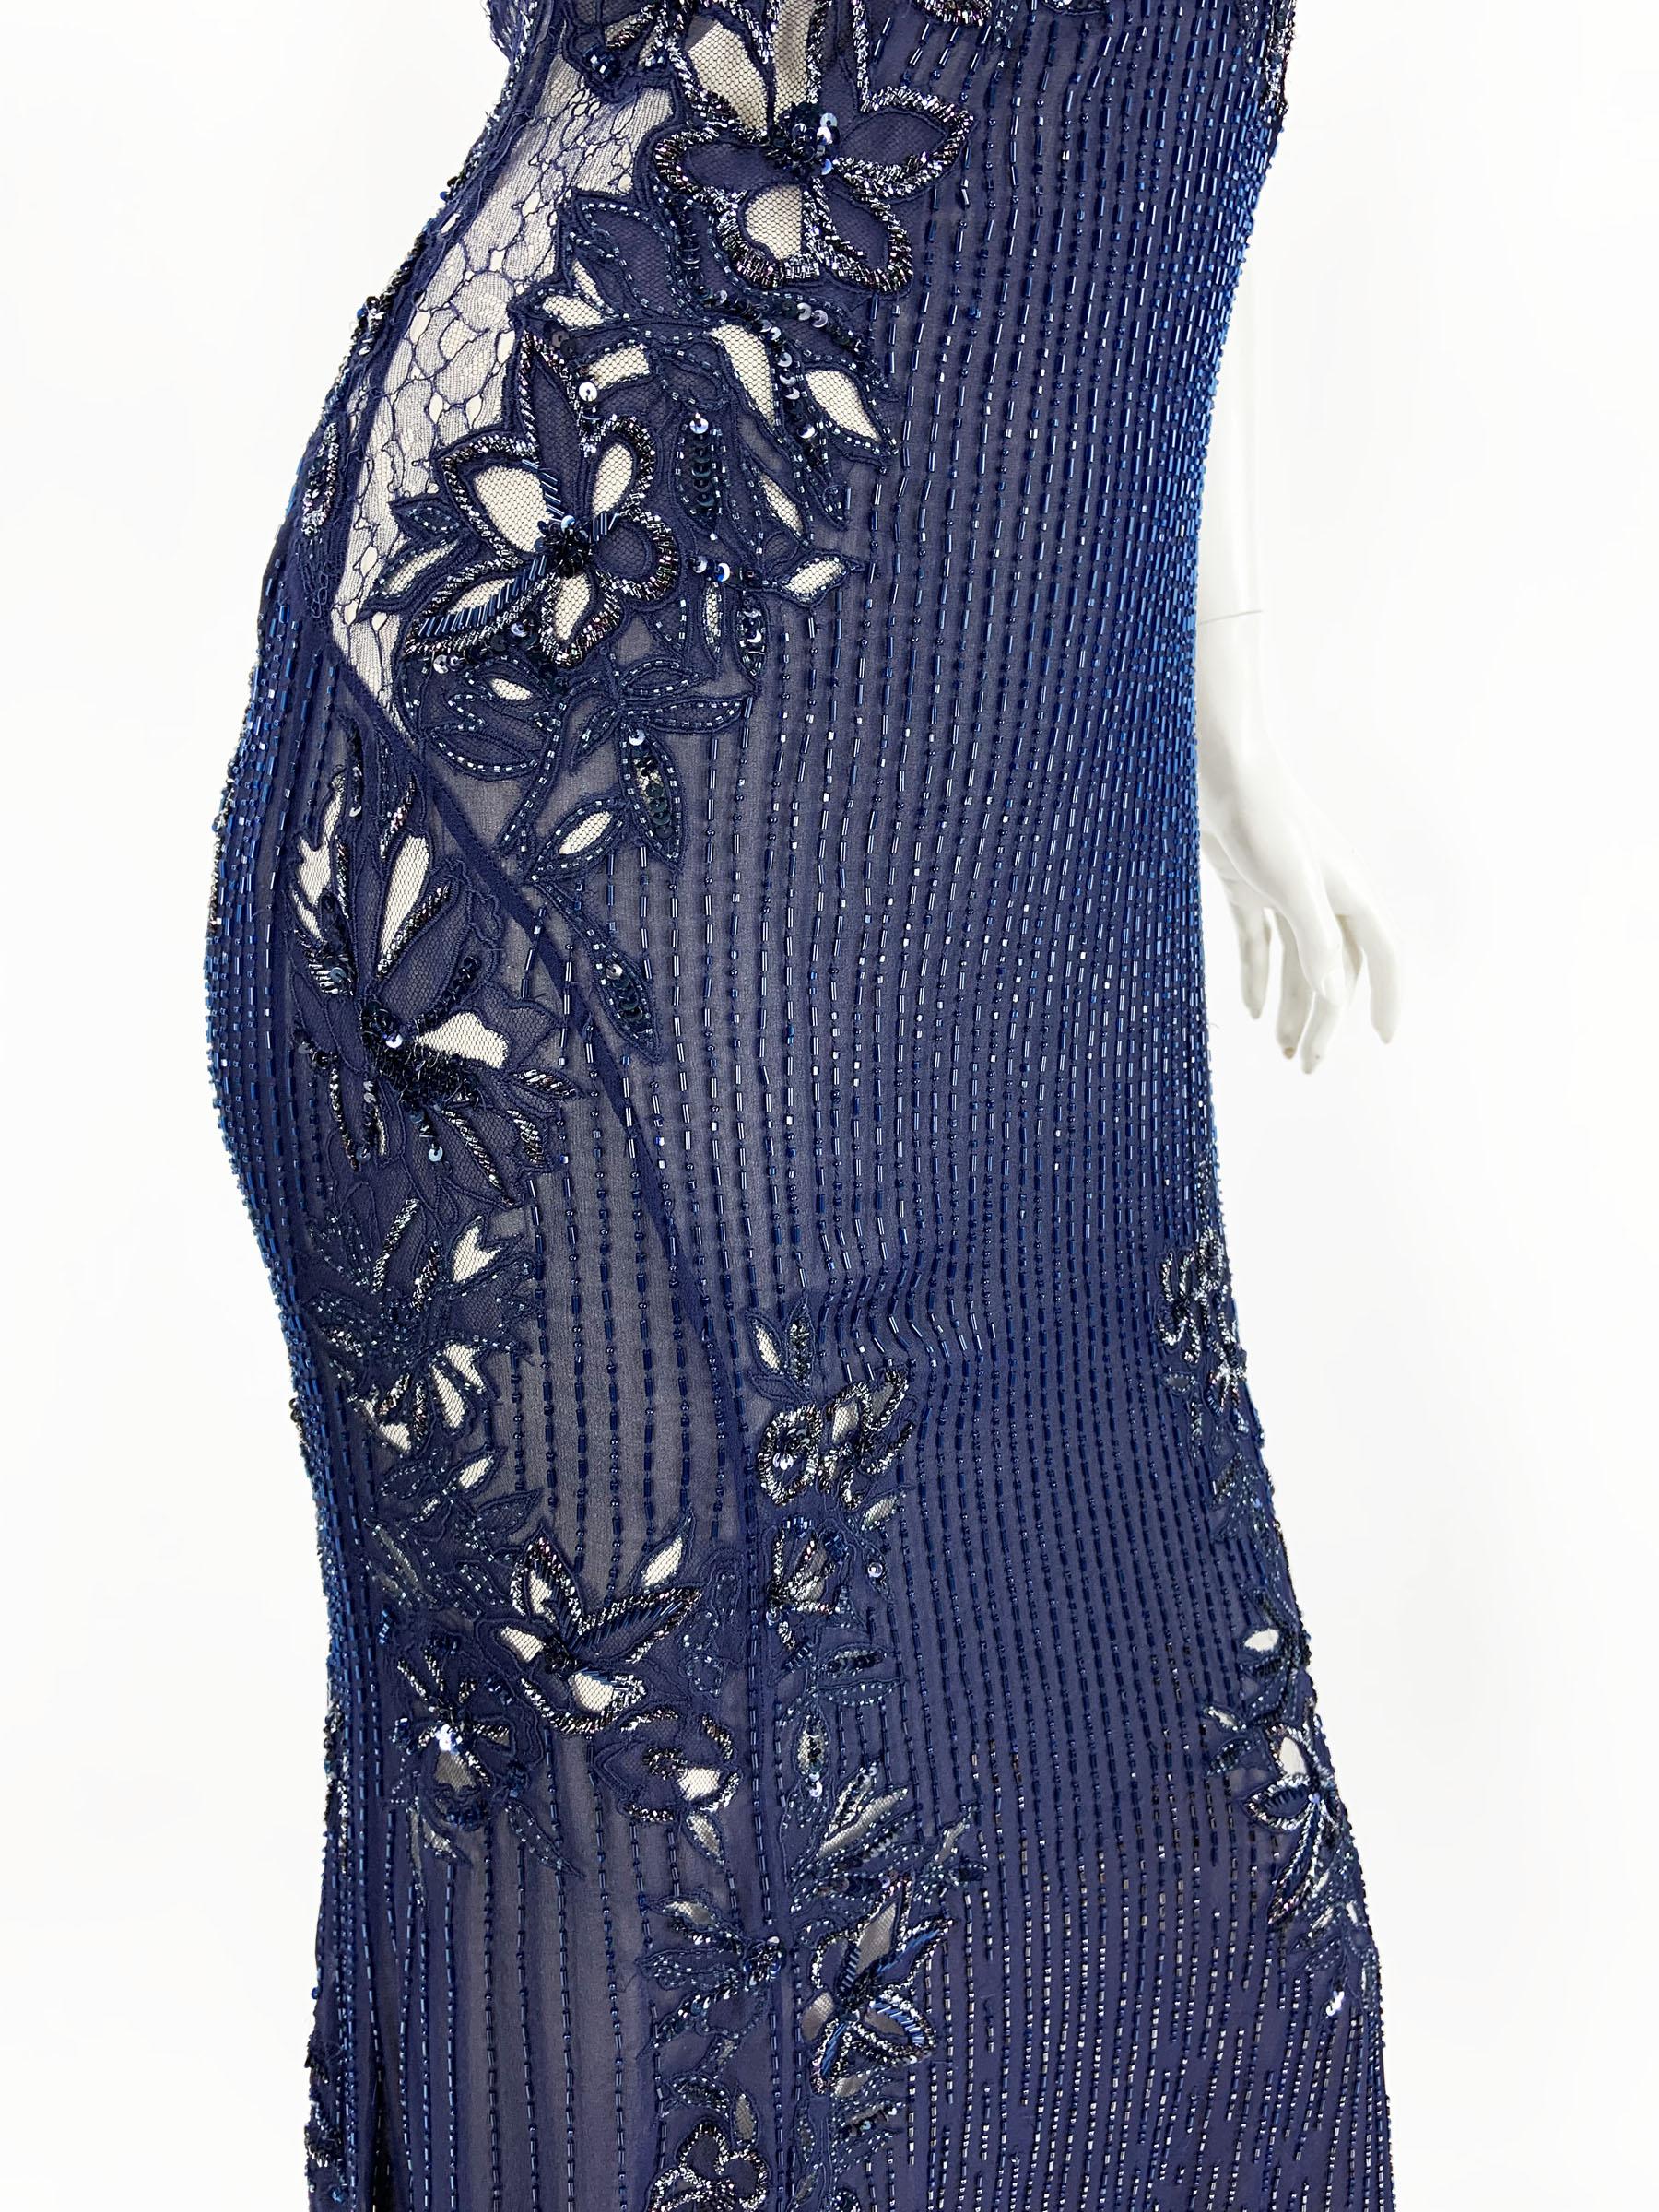 Roberto Cavalli Blue Silk Fully Embellished Dress Gown Italian 42 - US 6 For Sale 5